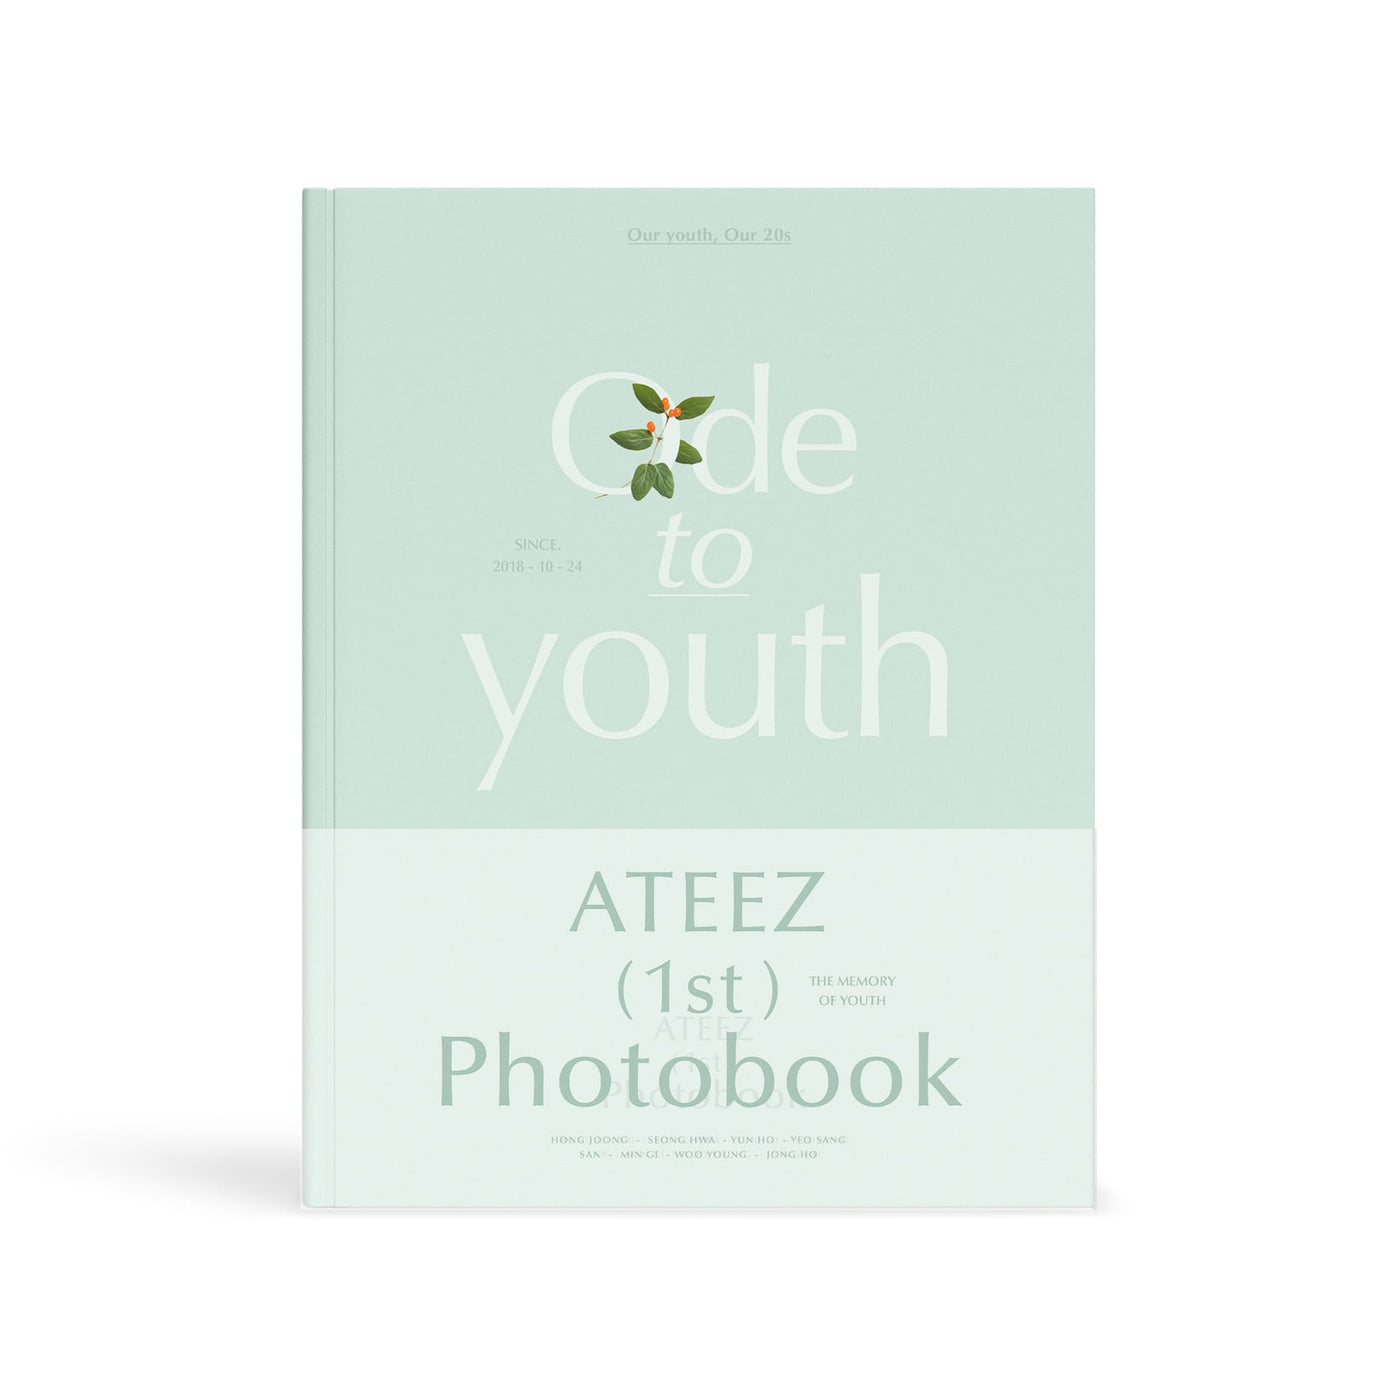 ATEEZ (PRE-ORDER) 1ST PHOTOBOOK ; ODE TO YOUTH 🇰🇷